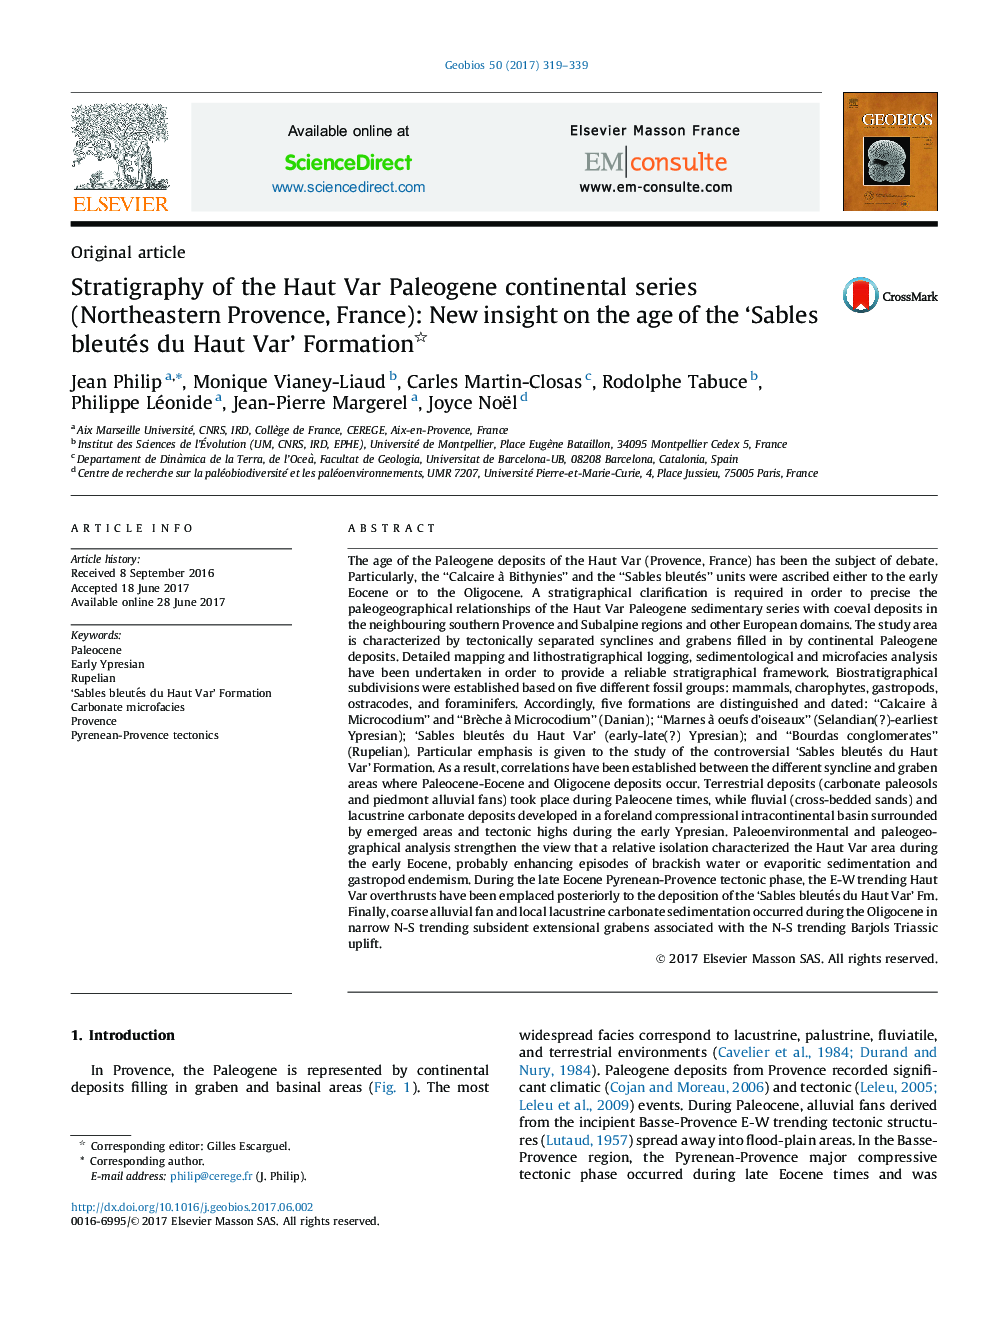 Original articleStratigraphy of the Haut Var Paleogene continental series (Northeastern Provence, France): New insight on the age of the 'Sables bleutés du Haut Var' Formation